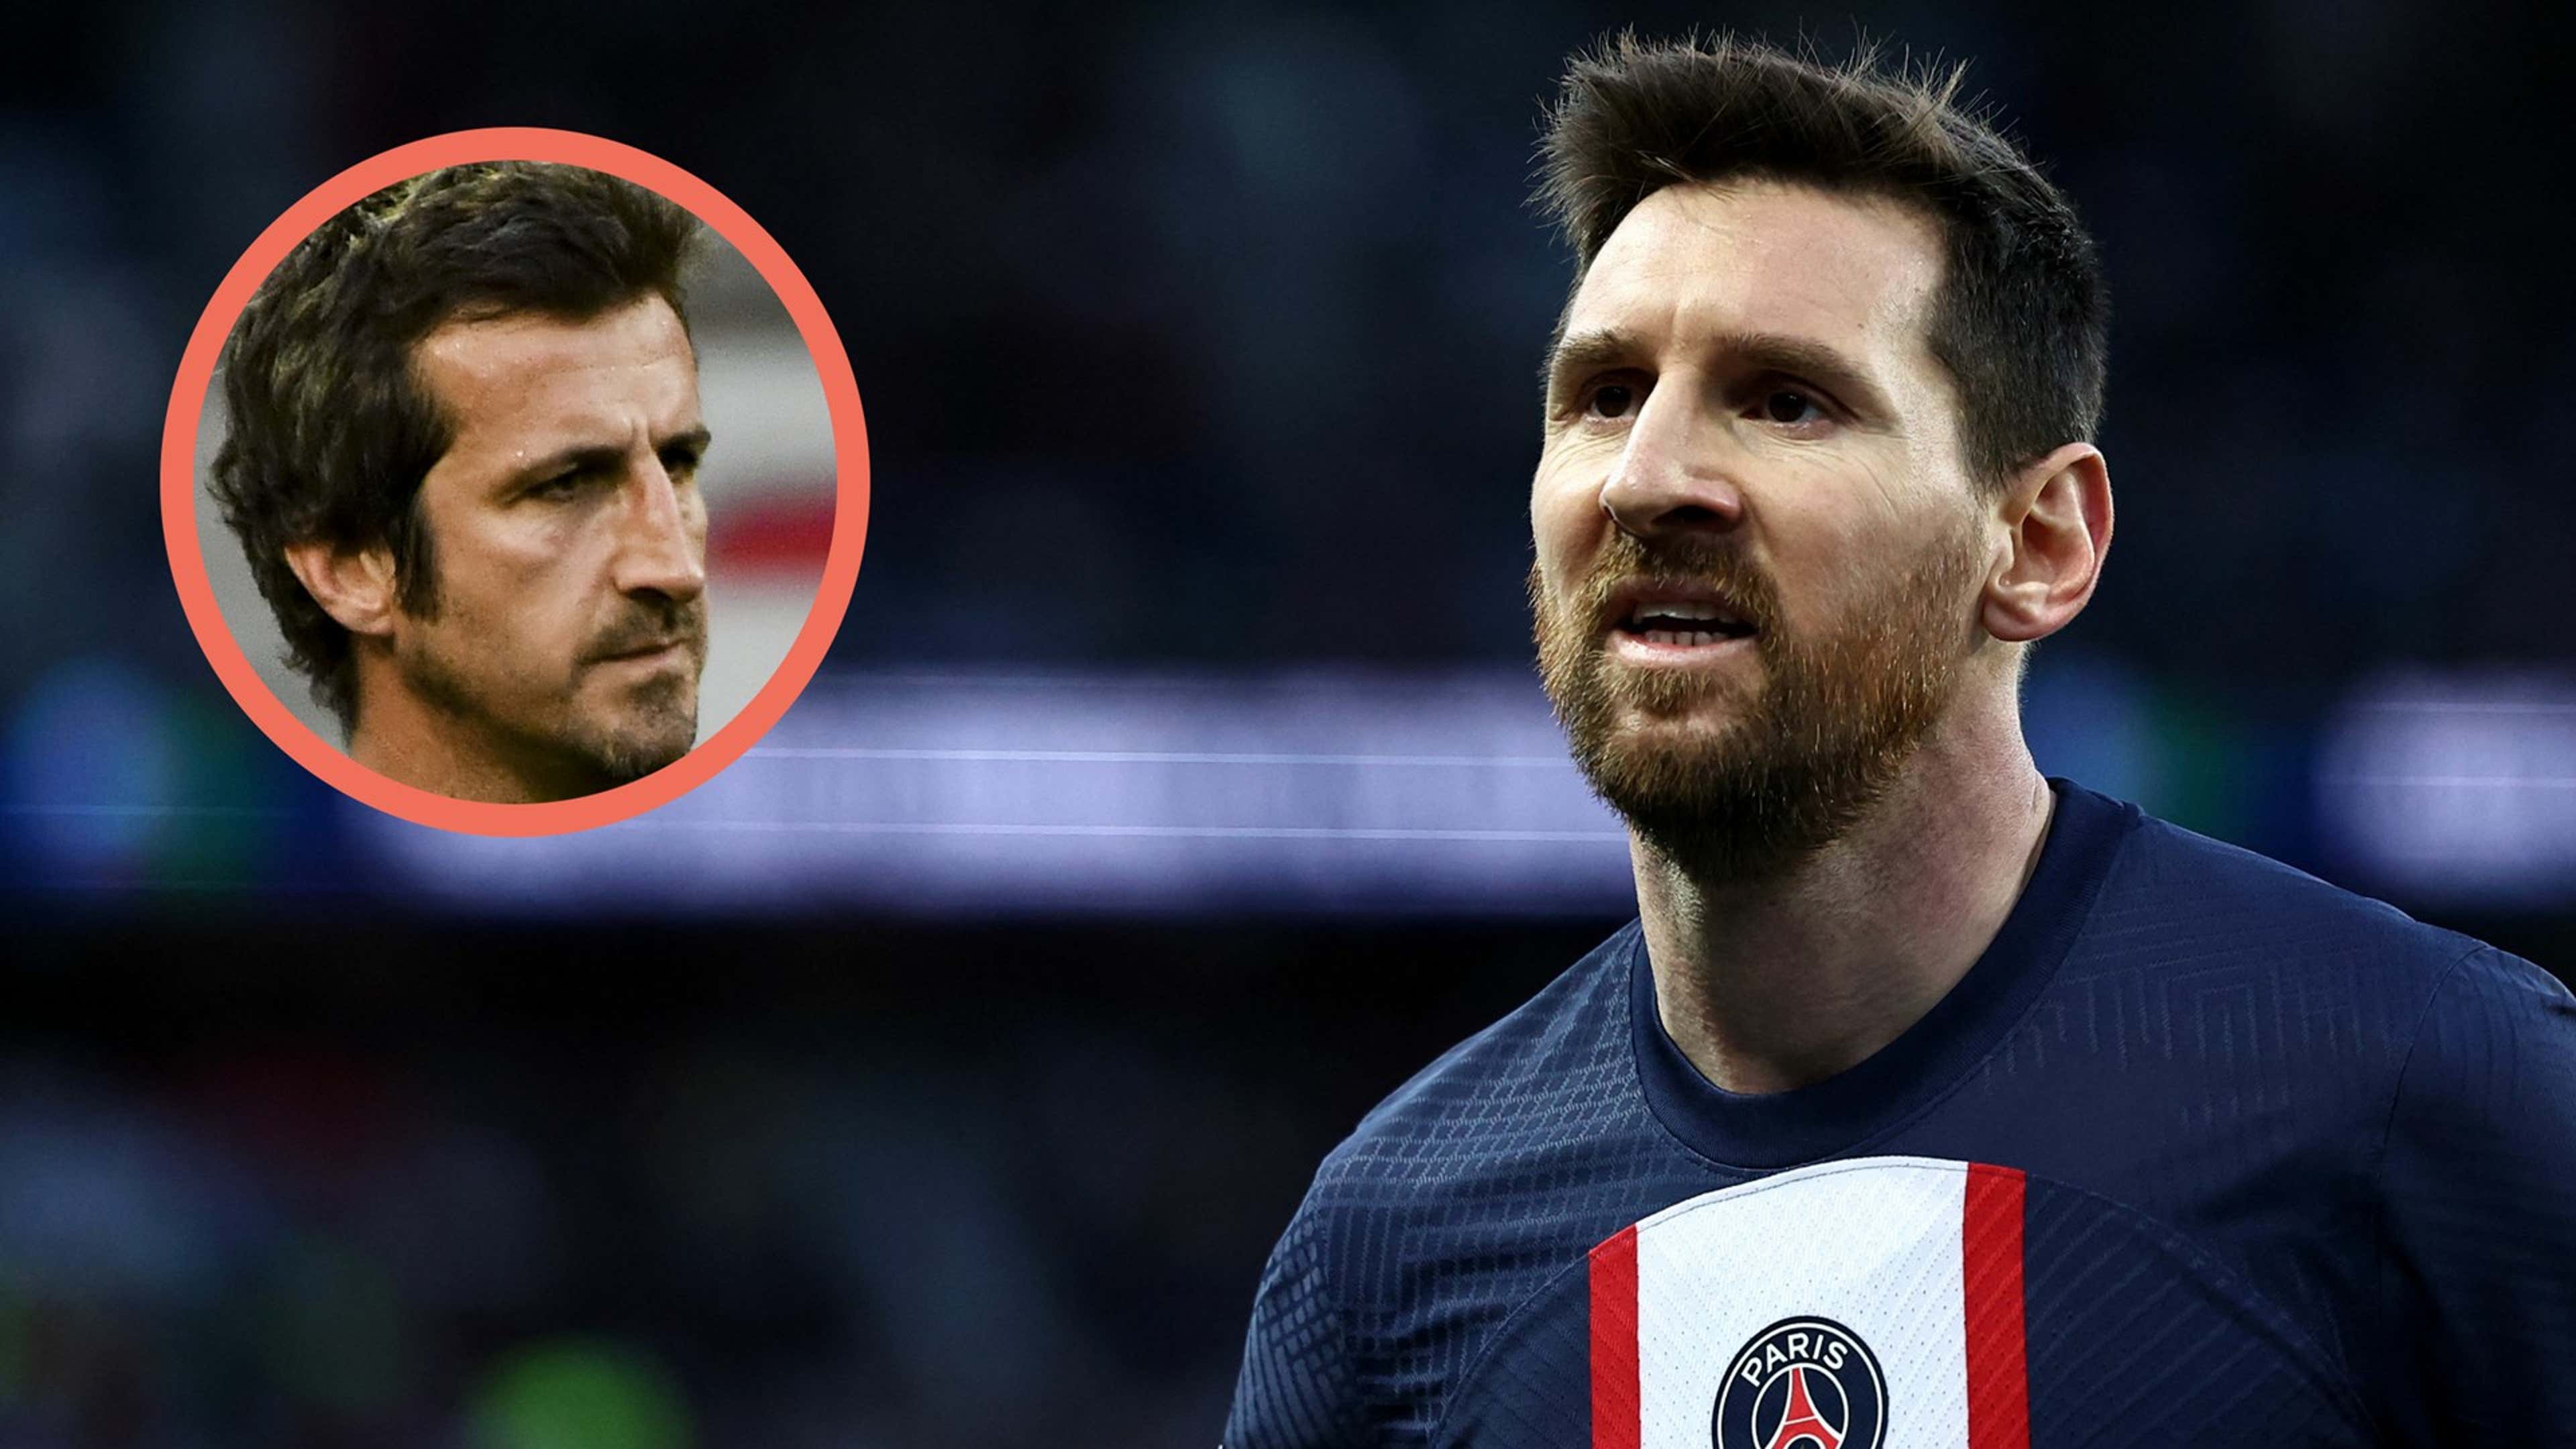 L Messi Xvideo Com - What allows you to say that?!' - Lionel Messi defended against claim he  doesn't care about PSG in fiery TV rant | Goal.com